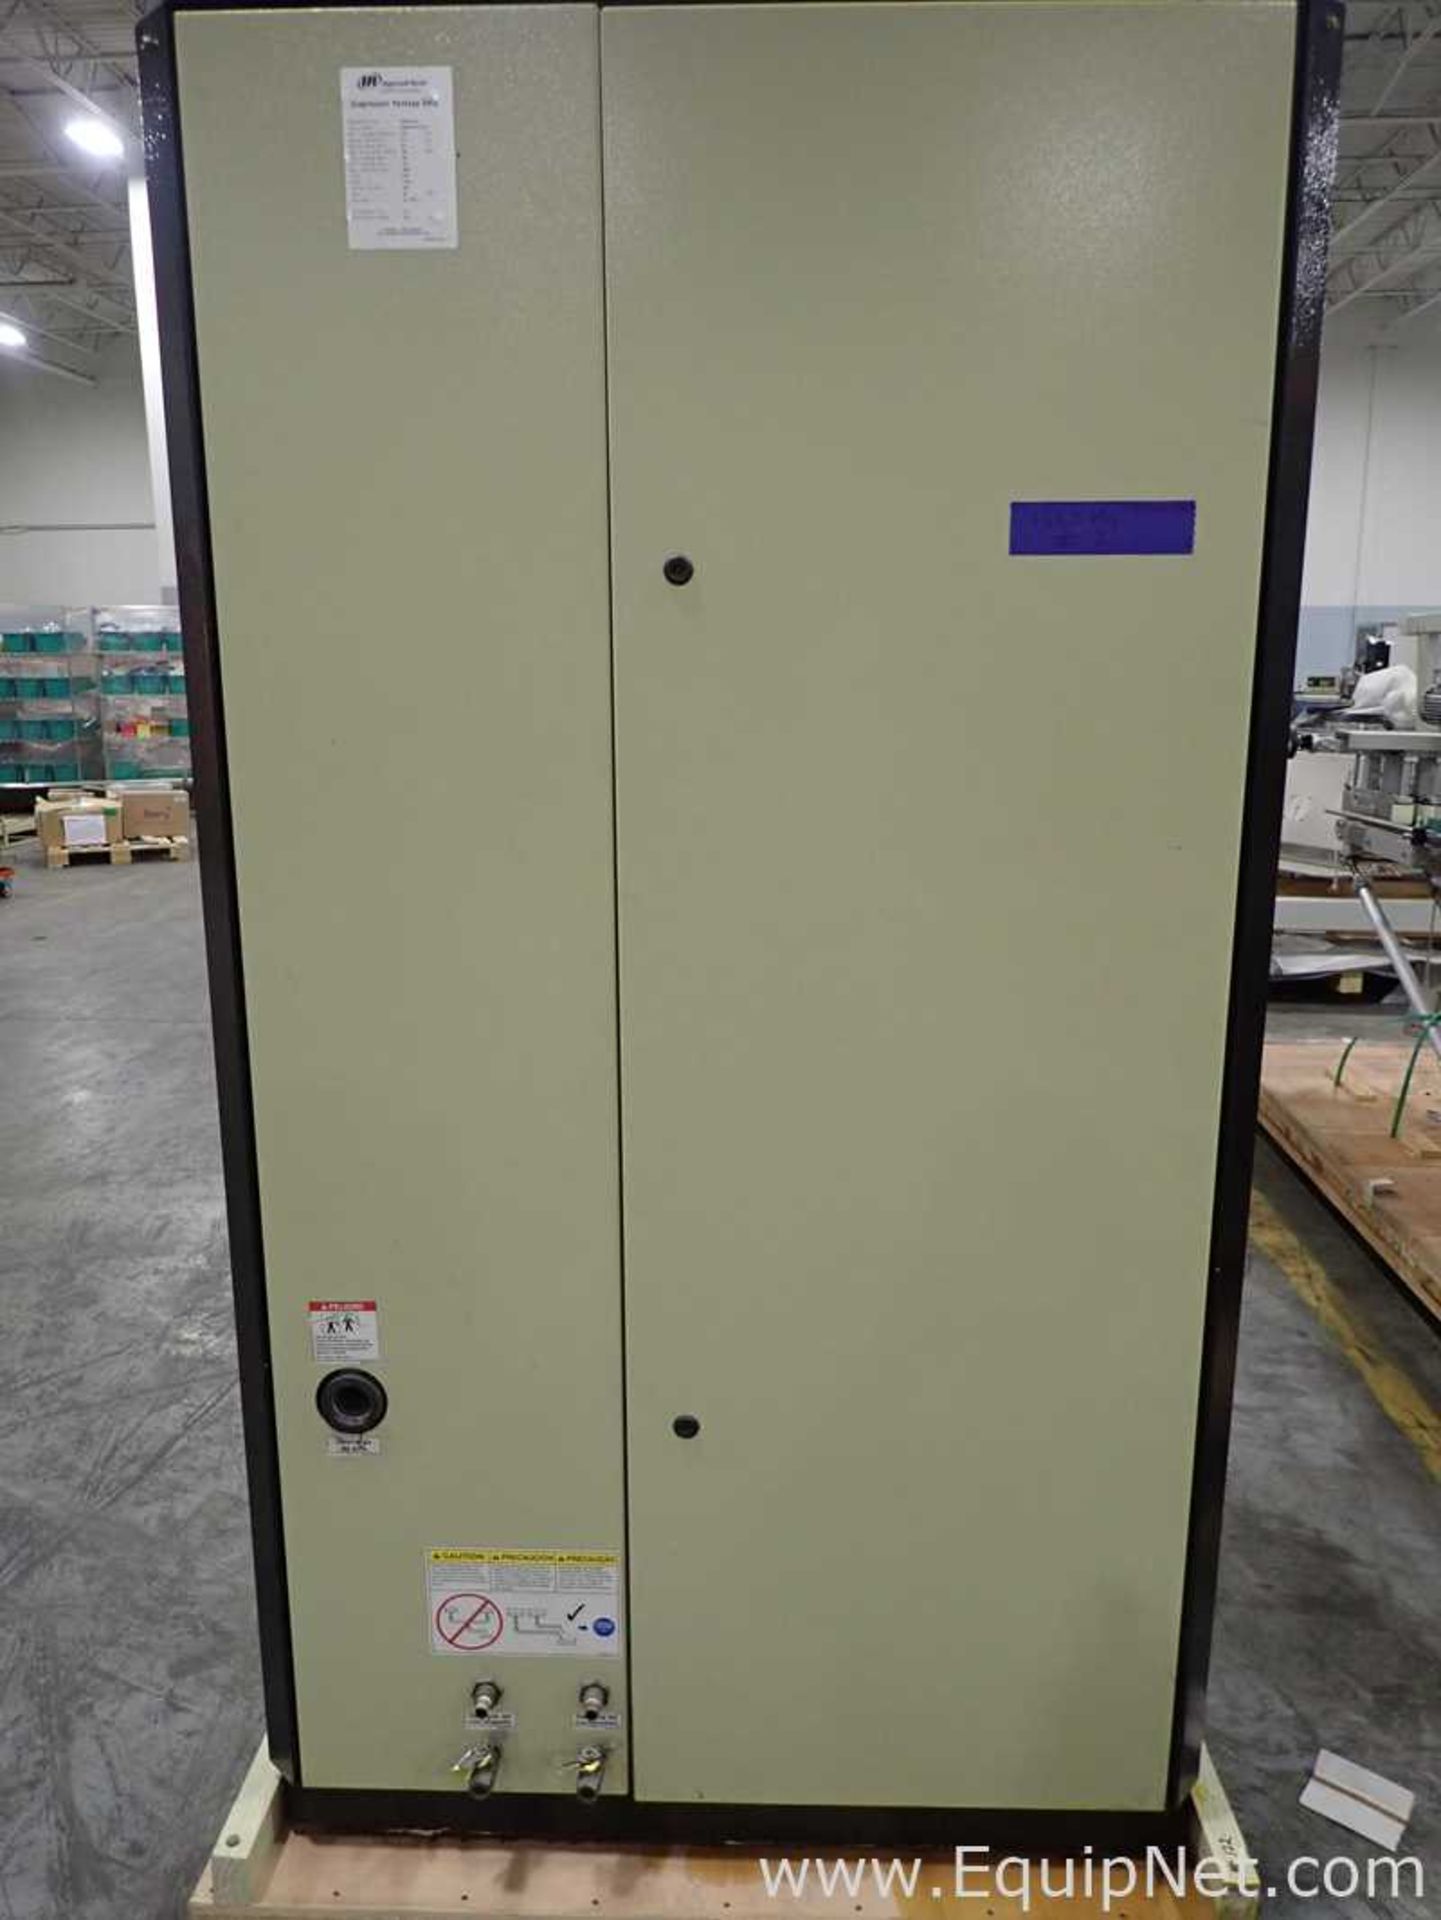 EQUIPNET LISTING #834126; REMOVAL COST: $40; MODEL: IRN50H-OF; DESCRIPTION: Ingersoll Rand IRN50H-OF - Image 6 of 16